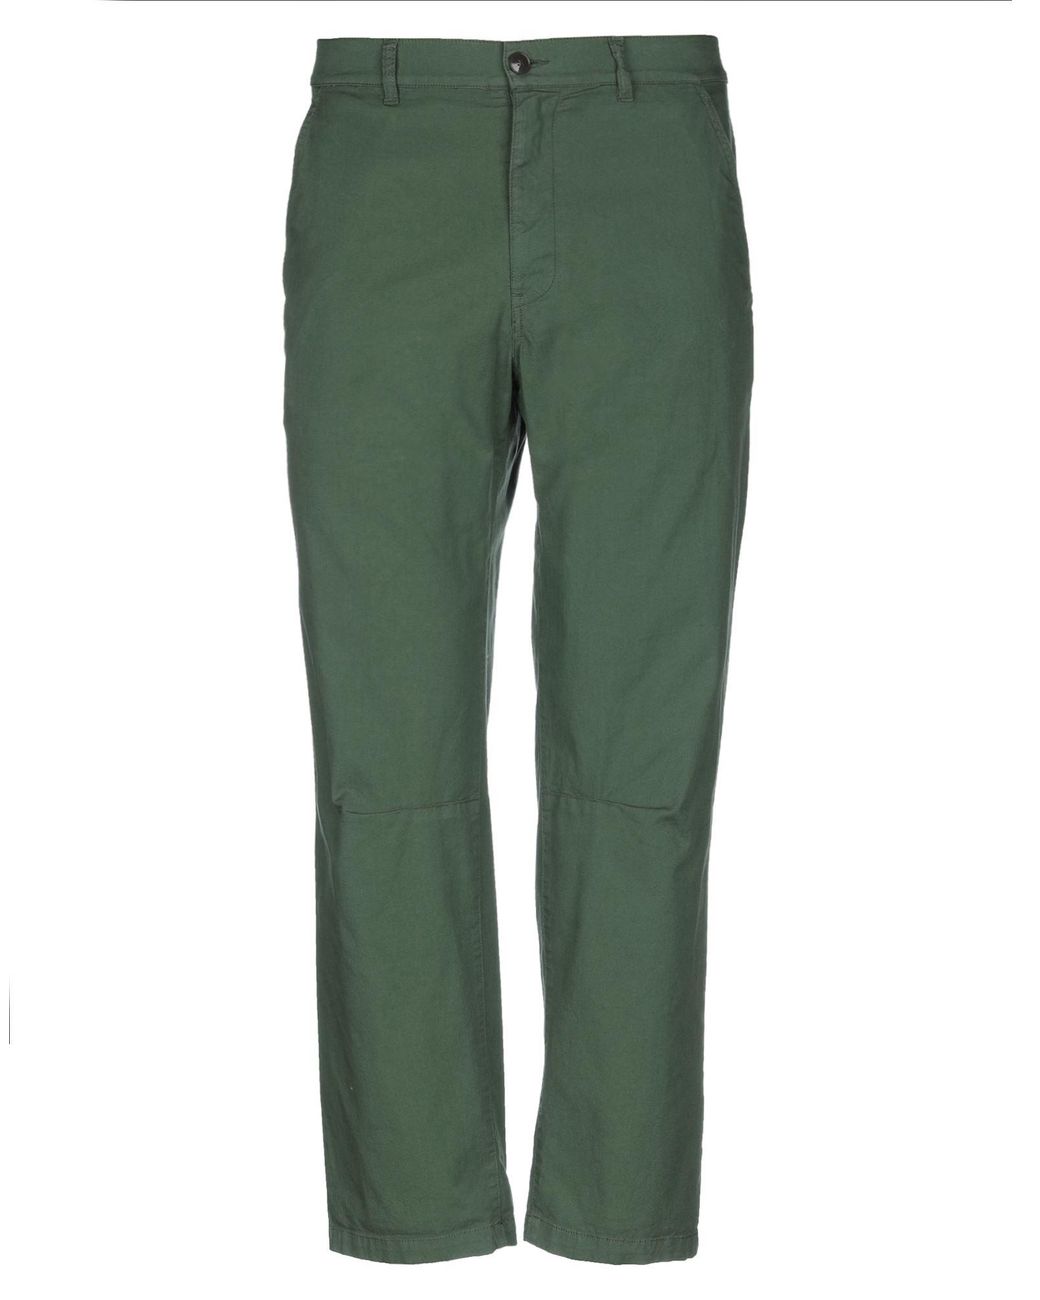 Barena Cotton Casual Pants in Military Green (Green) for Men - Lyst